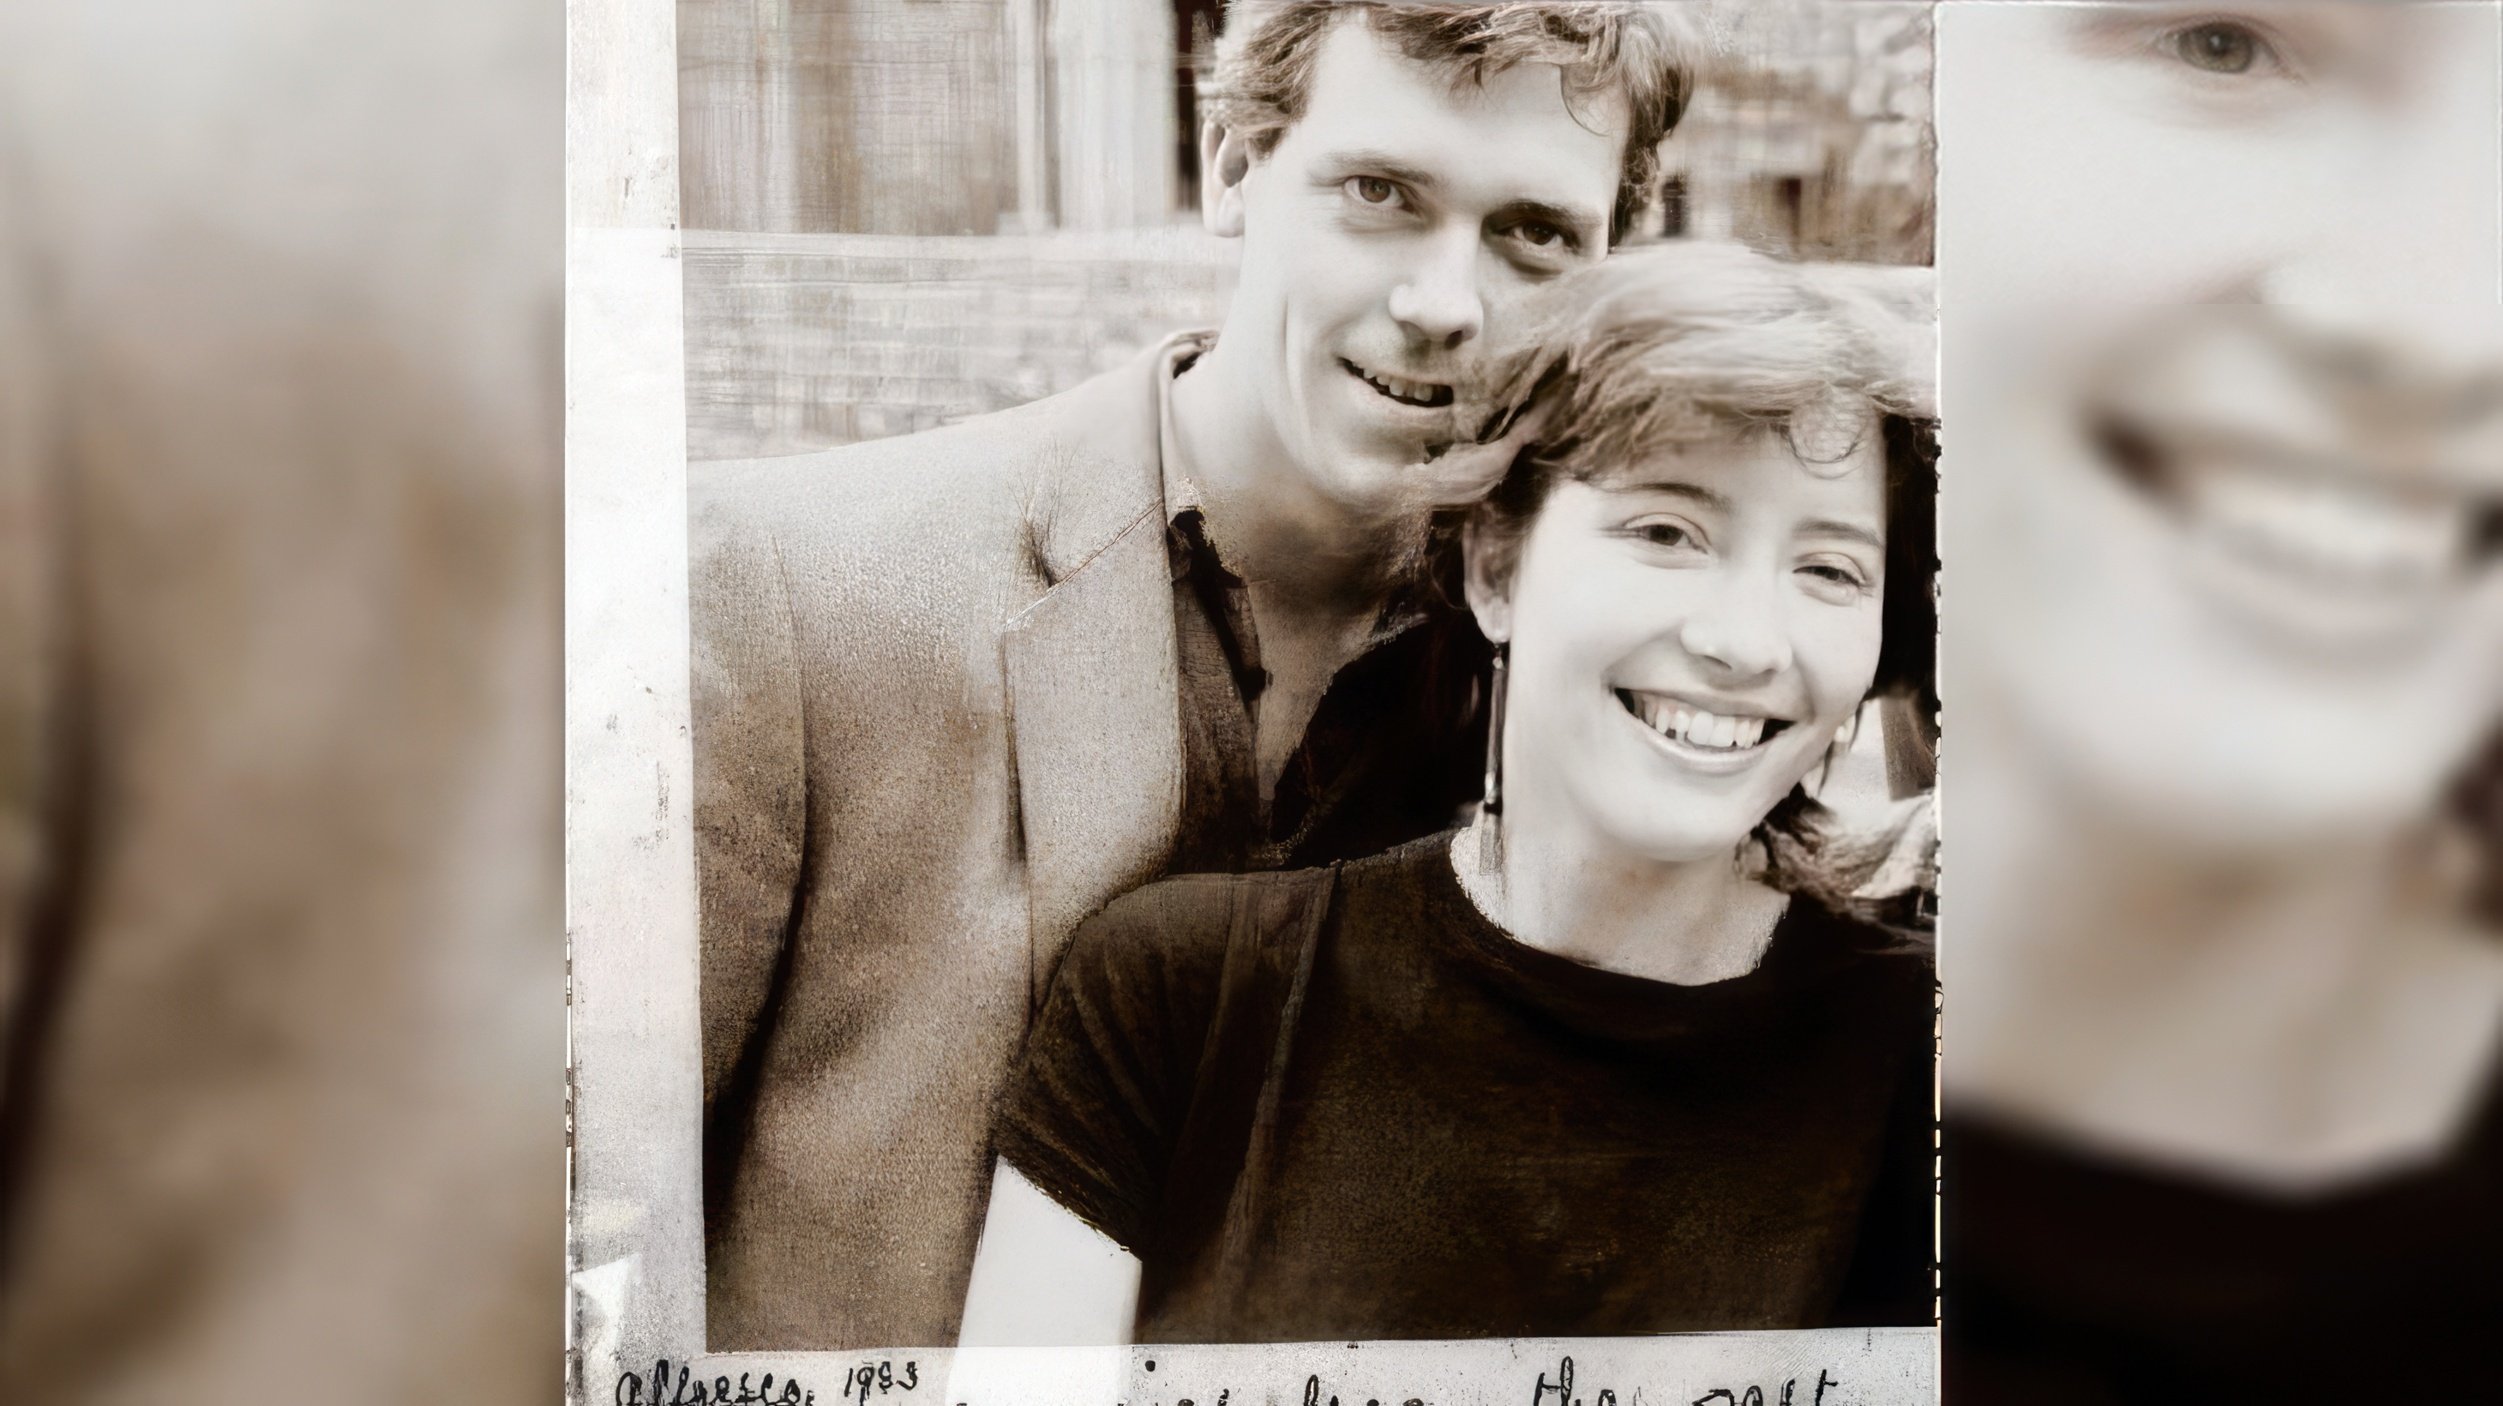 Hugh Laurie and Emma Thompson dated